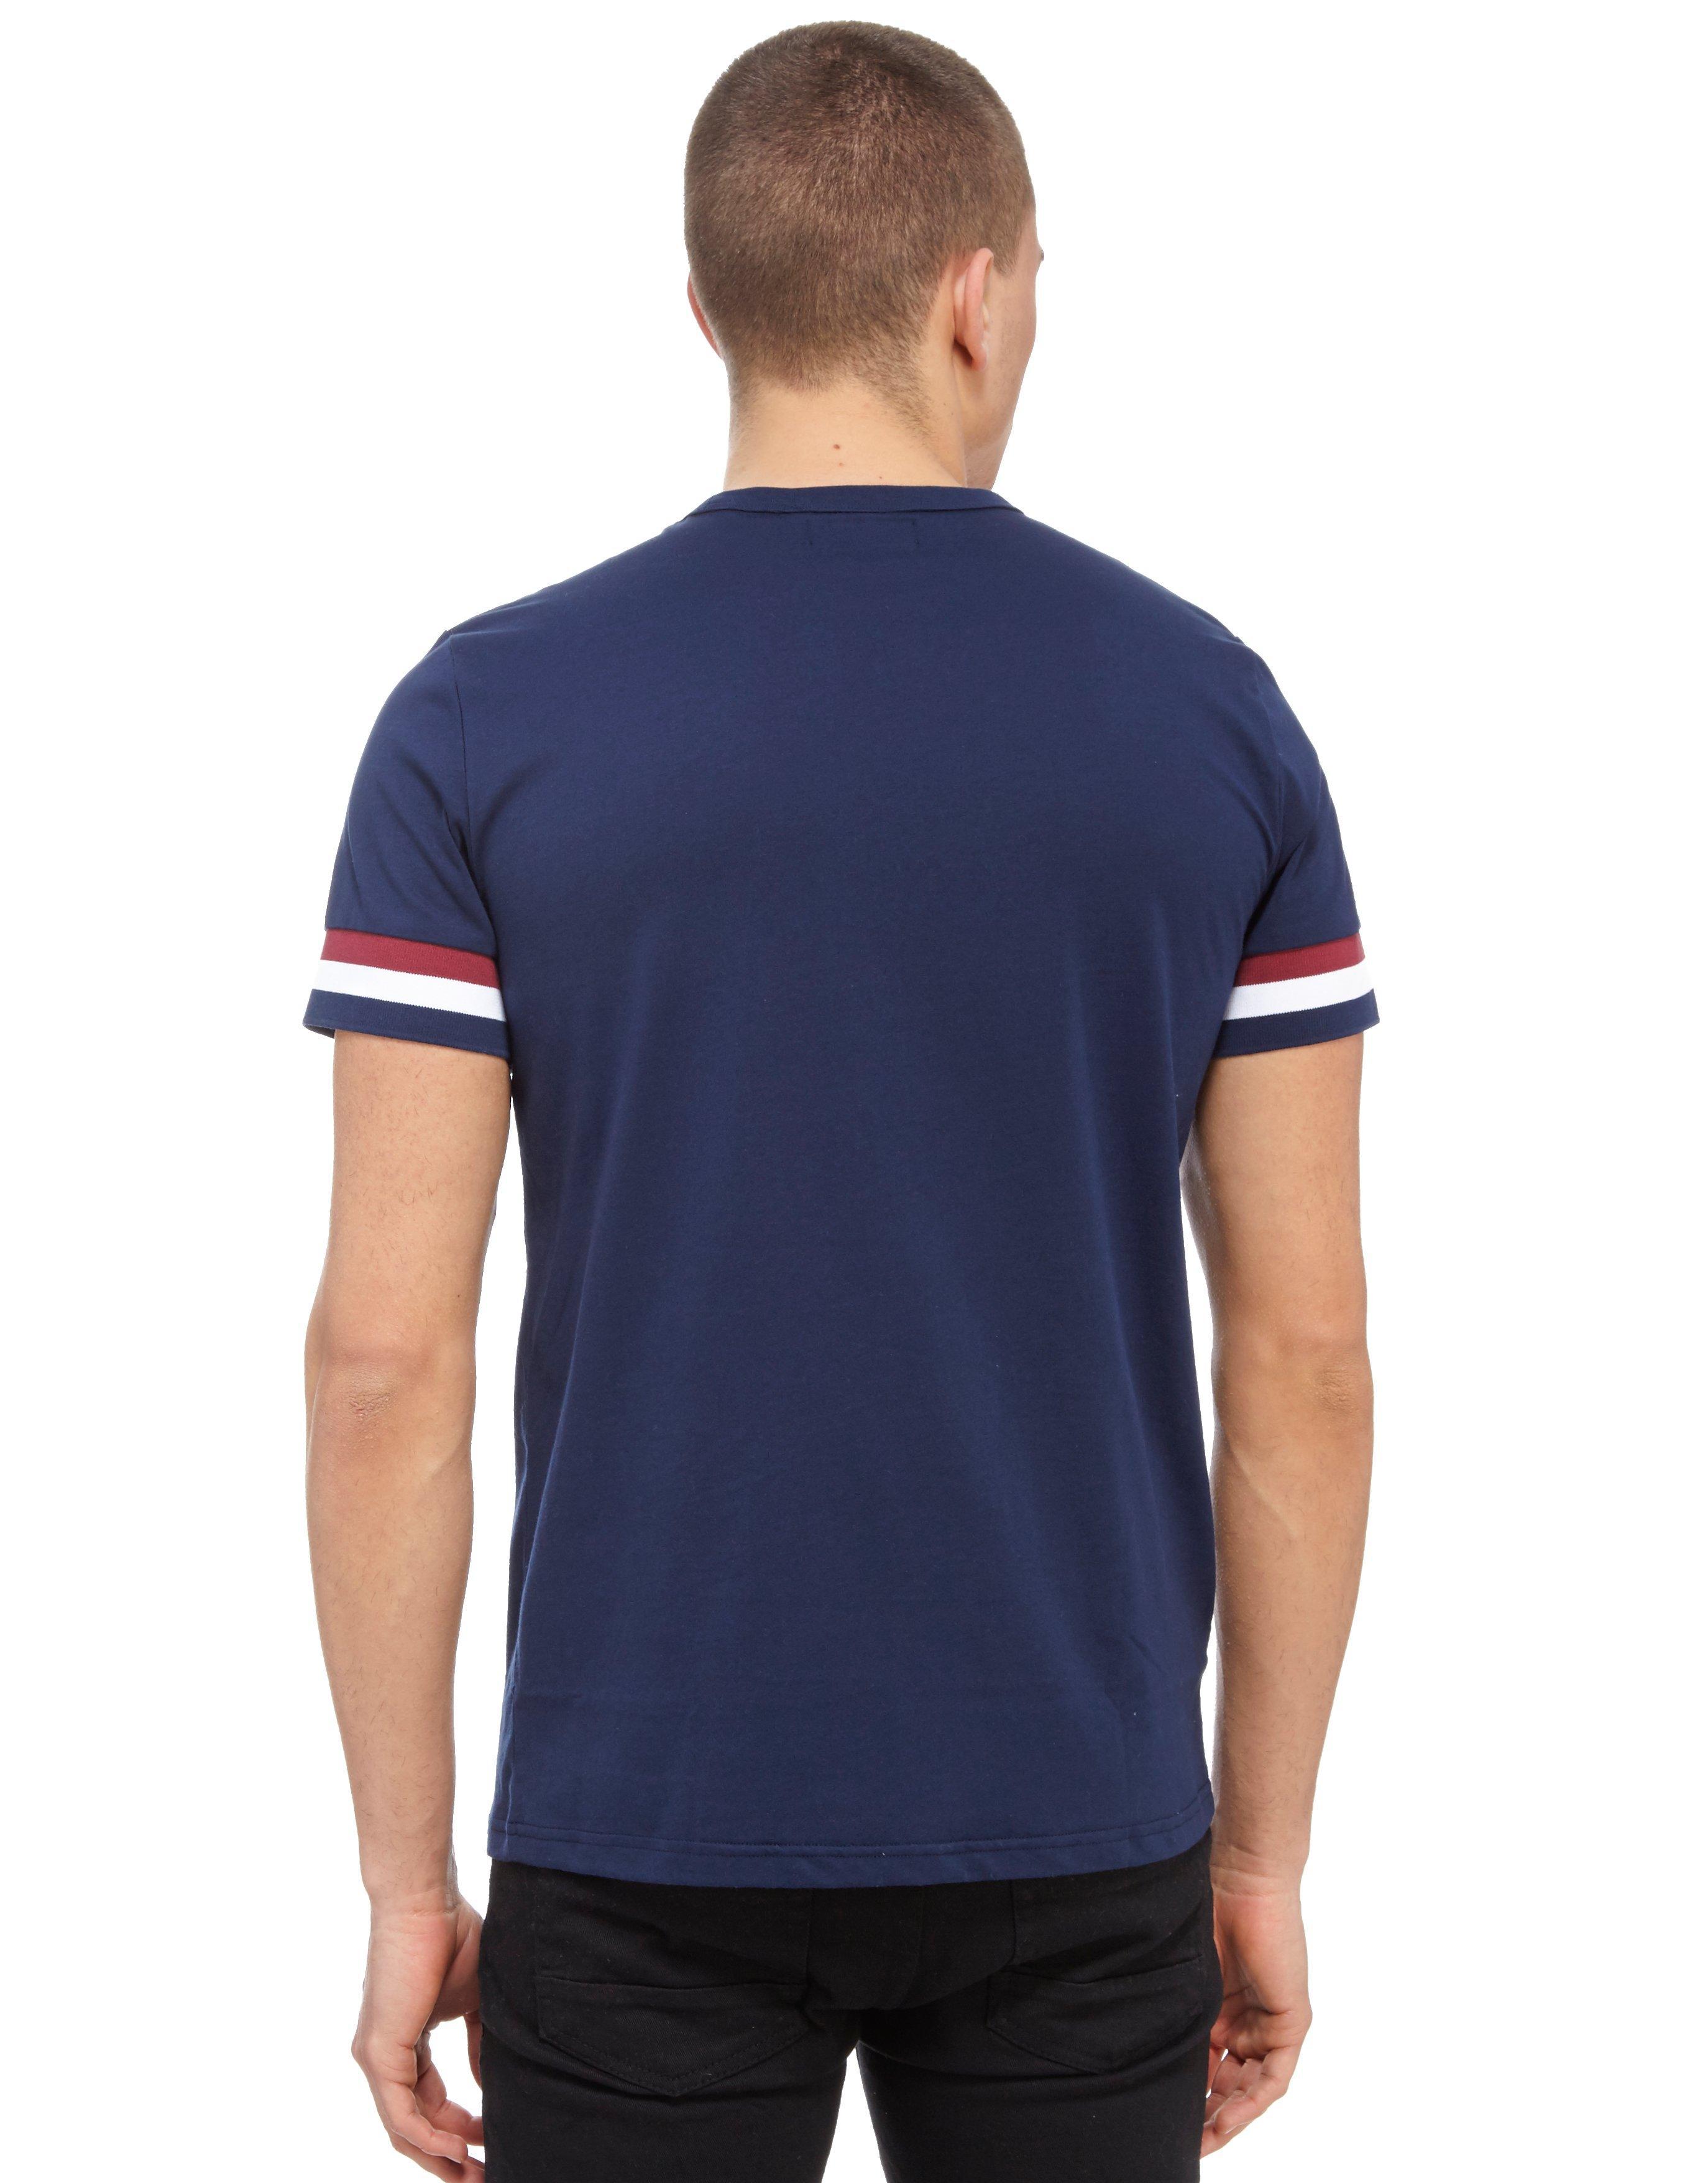 Fred Perry Striped Cuff T-shirt in Blue for Men - Lyst